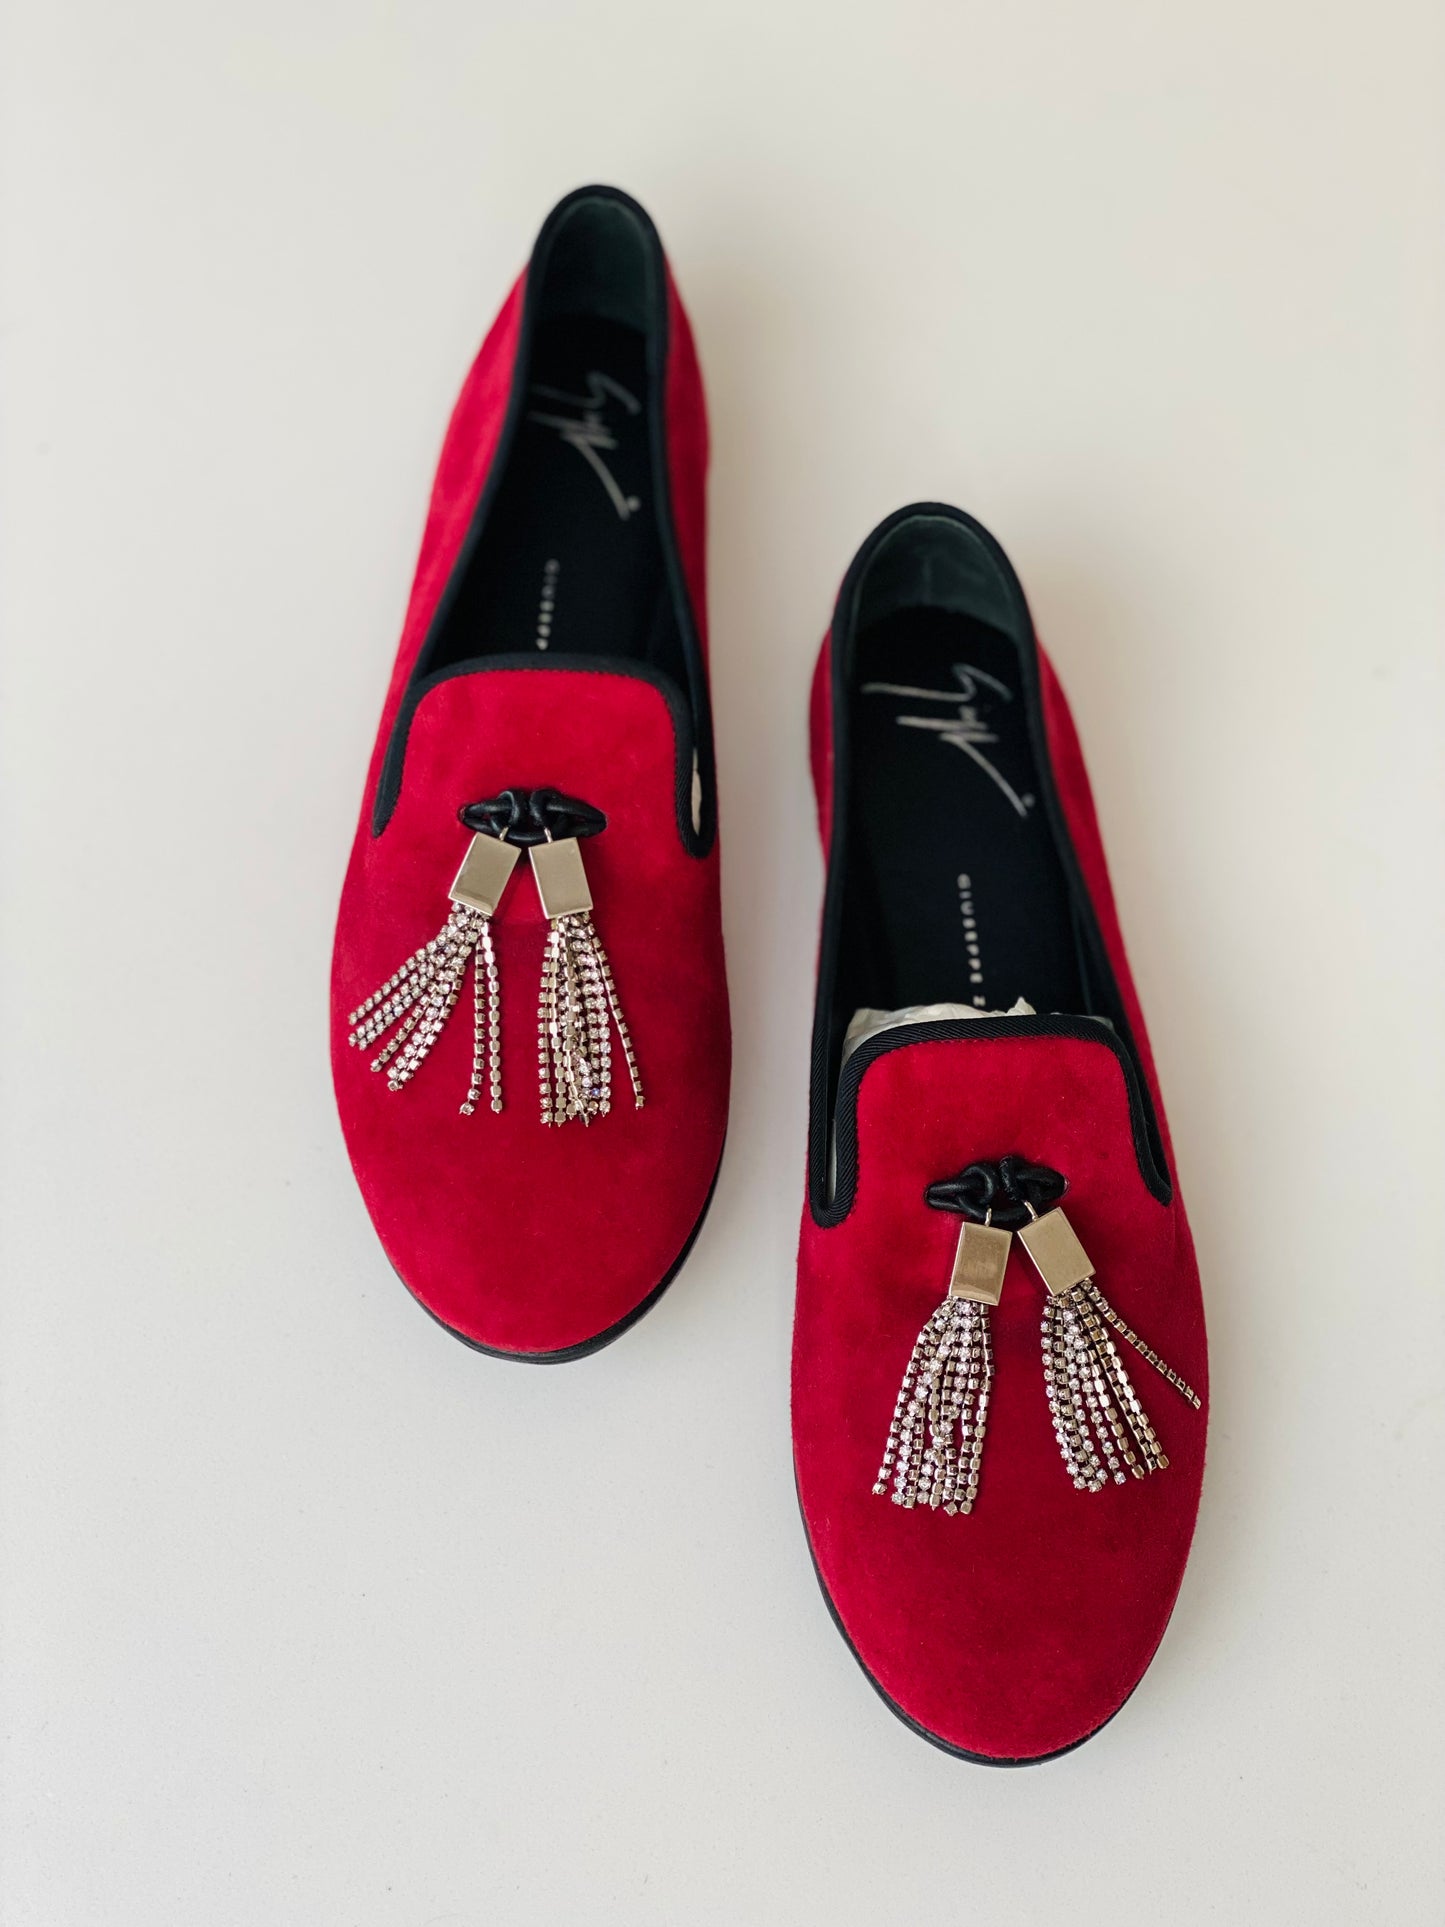 Red Suede Loafers - 7.5